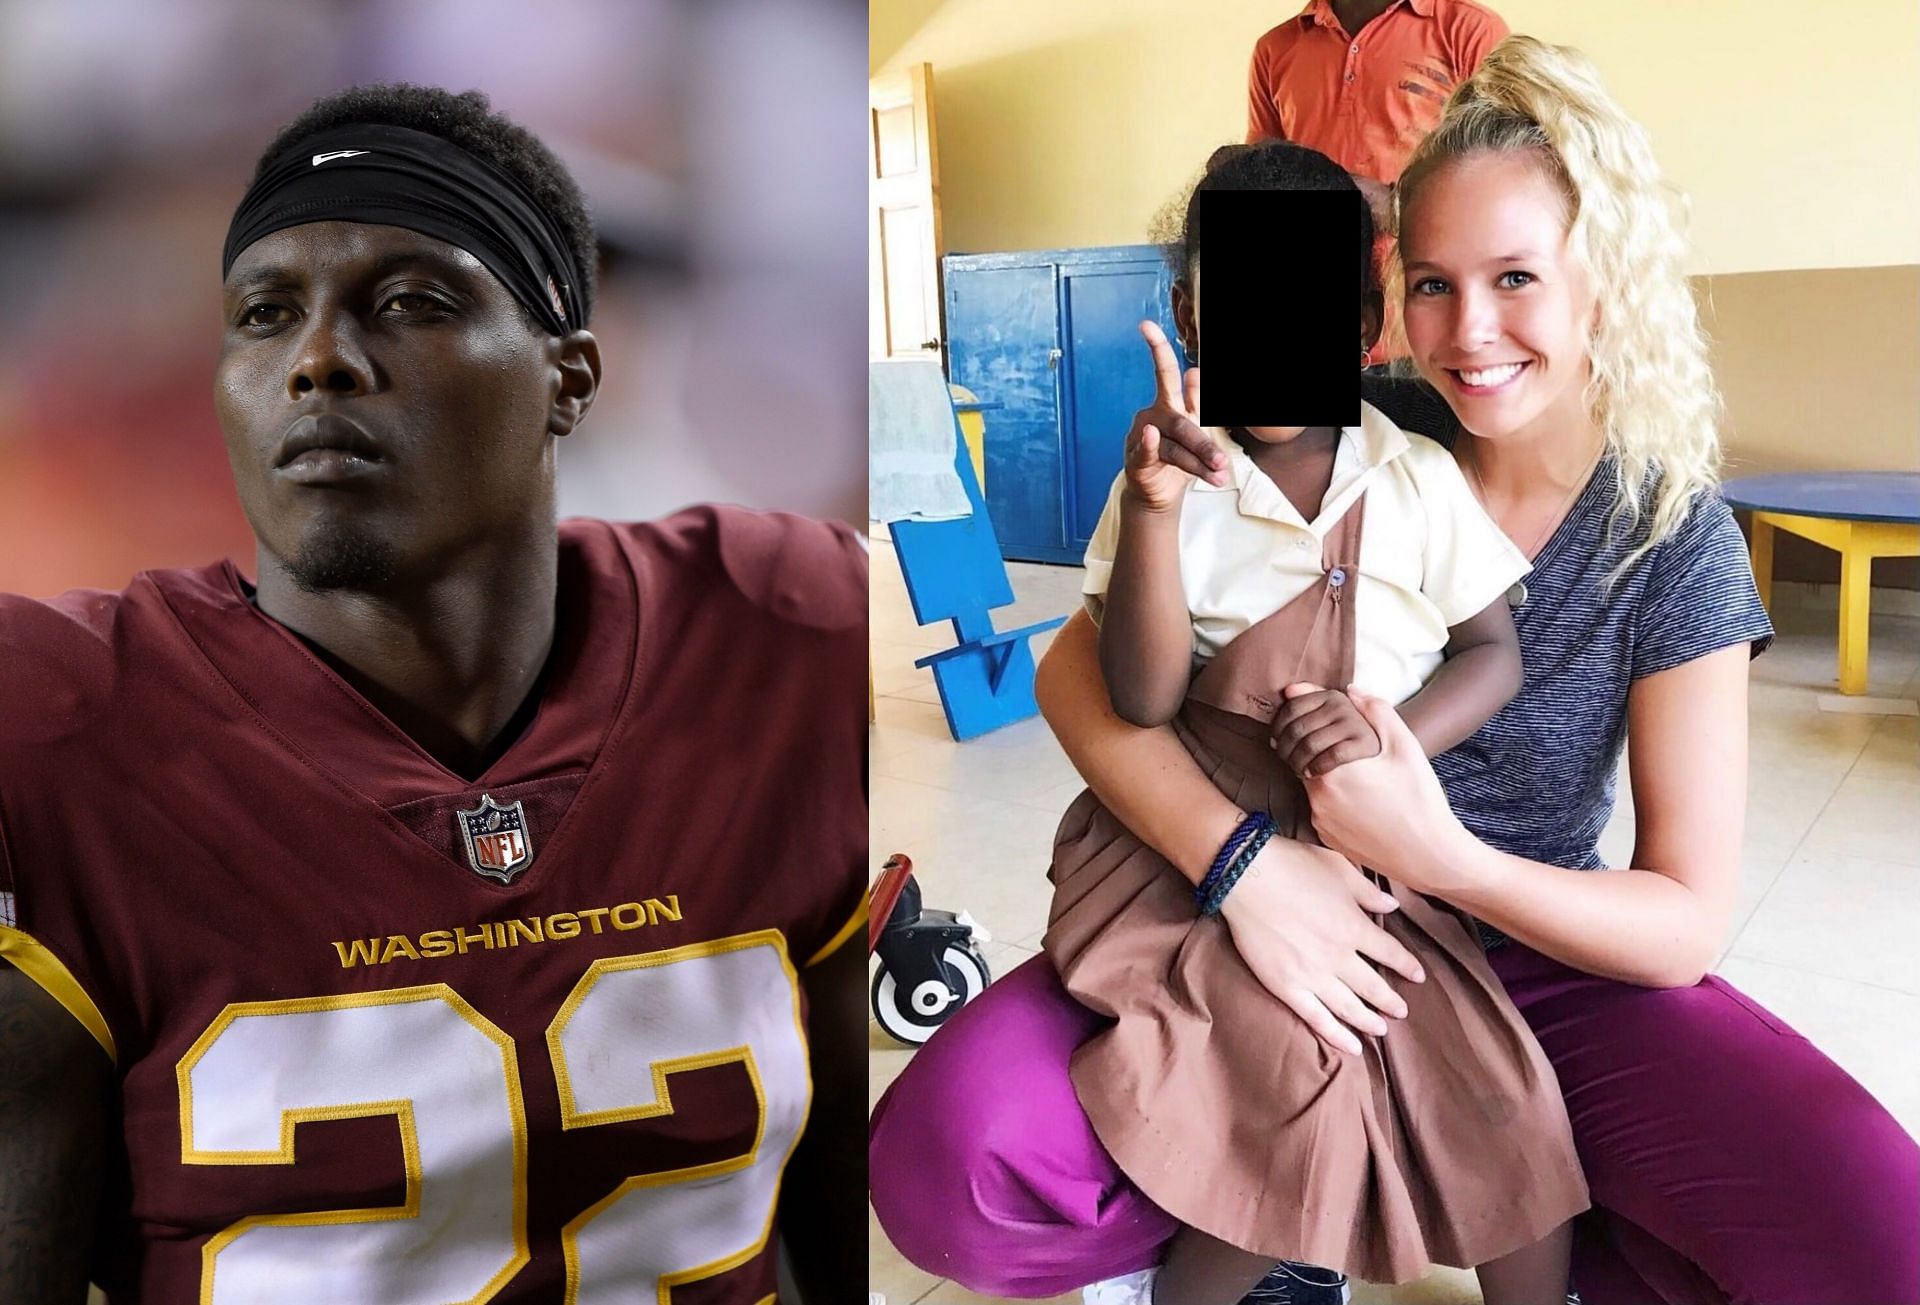 Deshazor Everett and Olivia S. Peter (Image via Greg Fiume/Getty Images, and david.kaplanfox5dc/ Facebook)